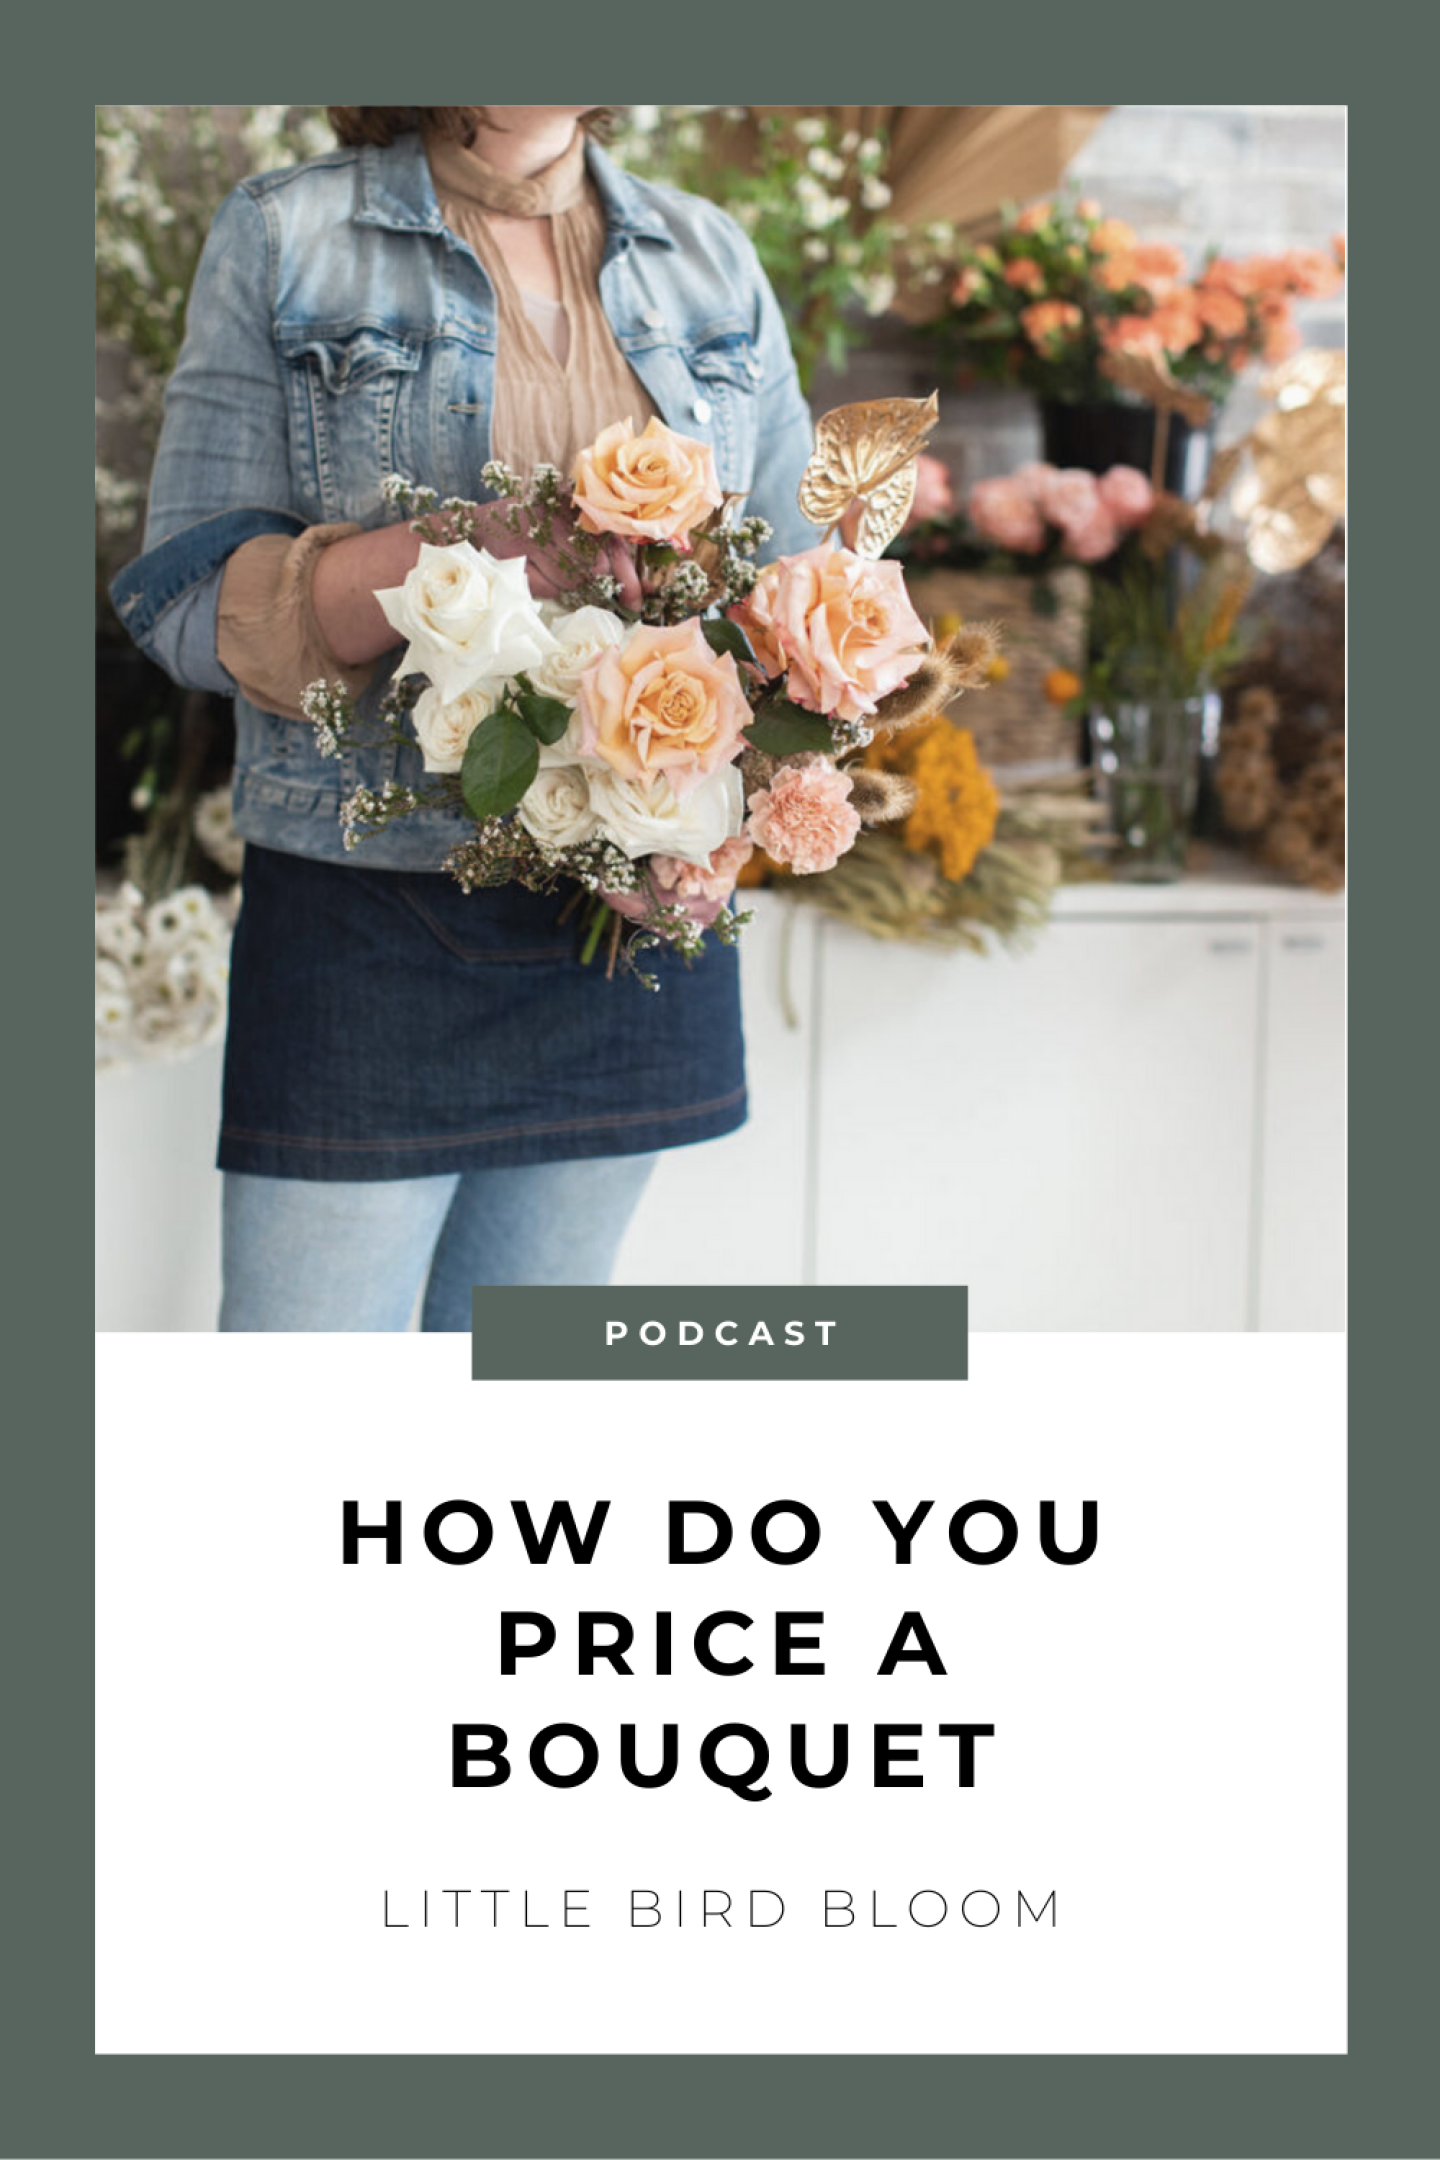 How do you price a bouquet